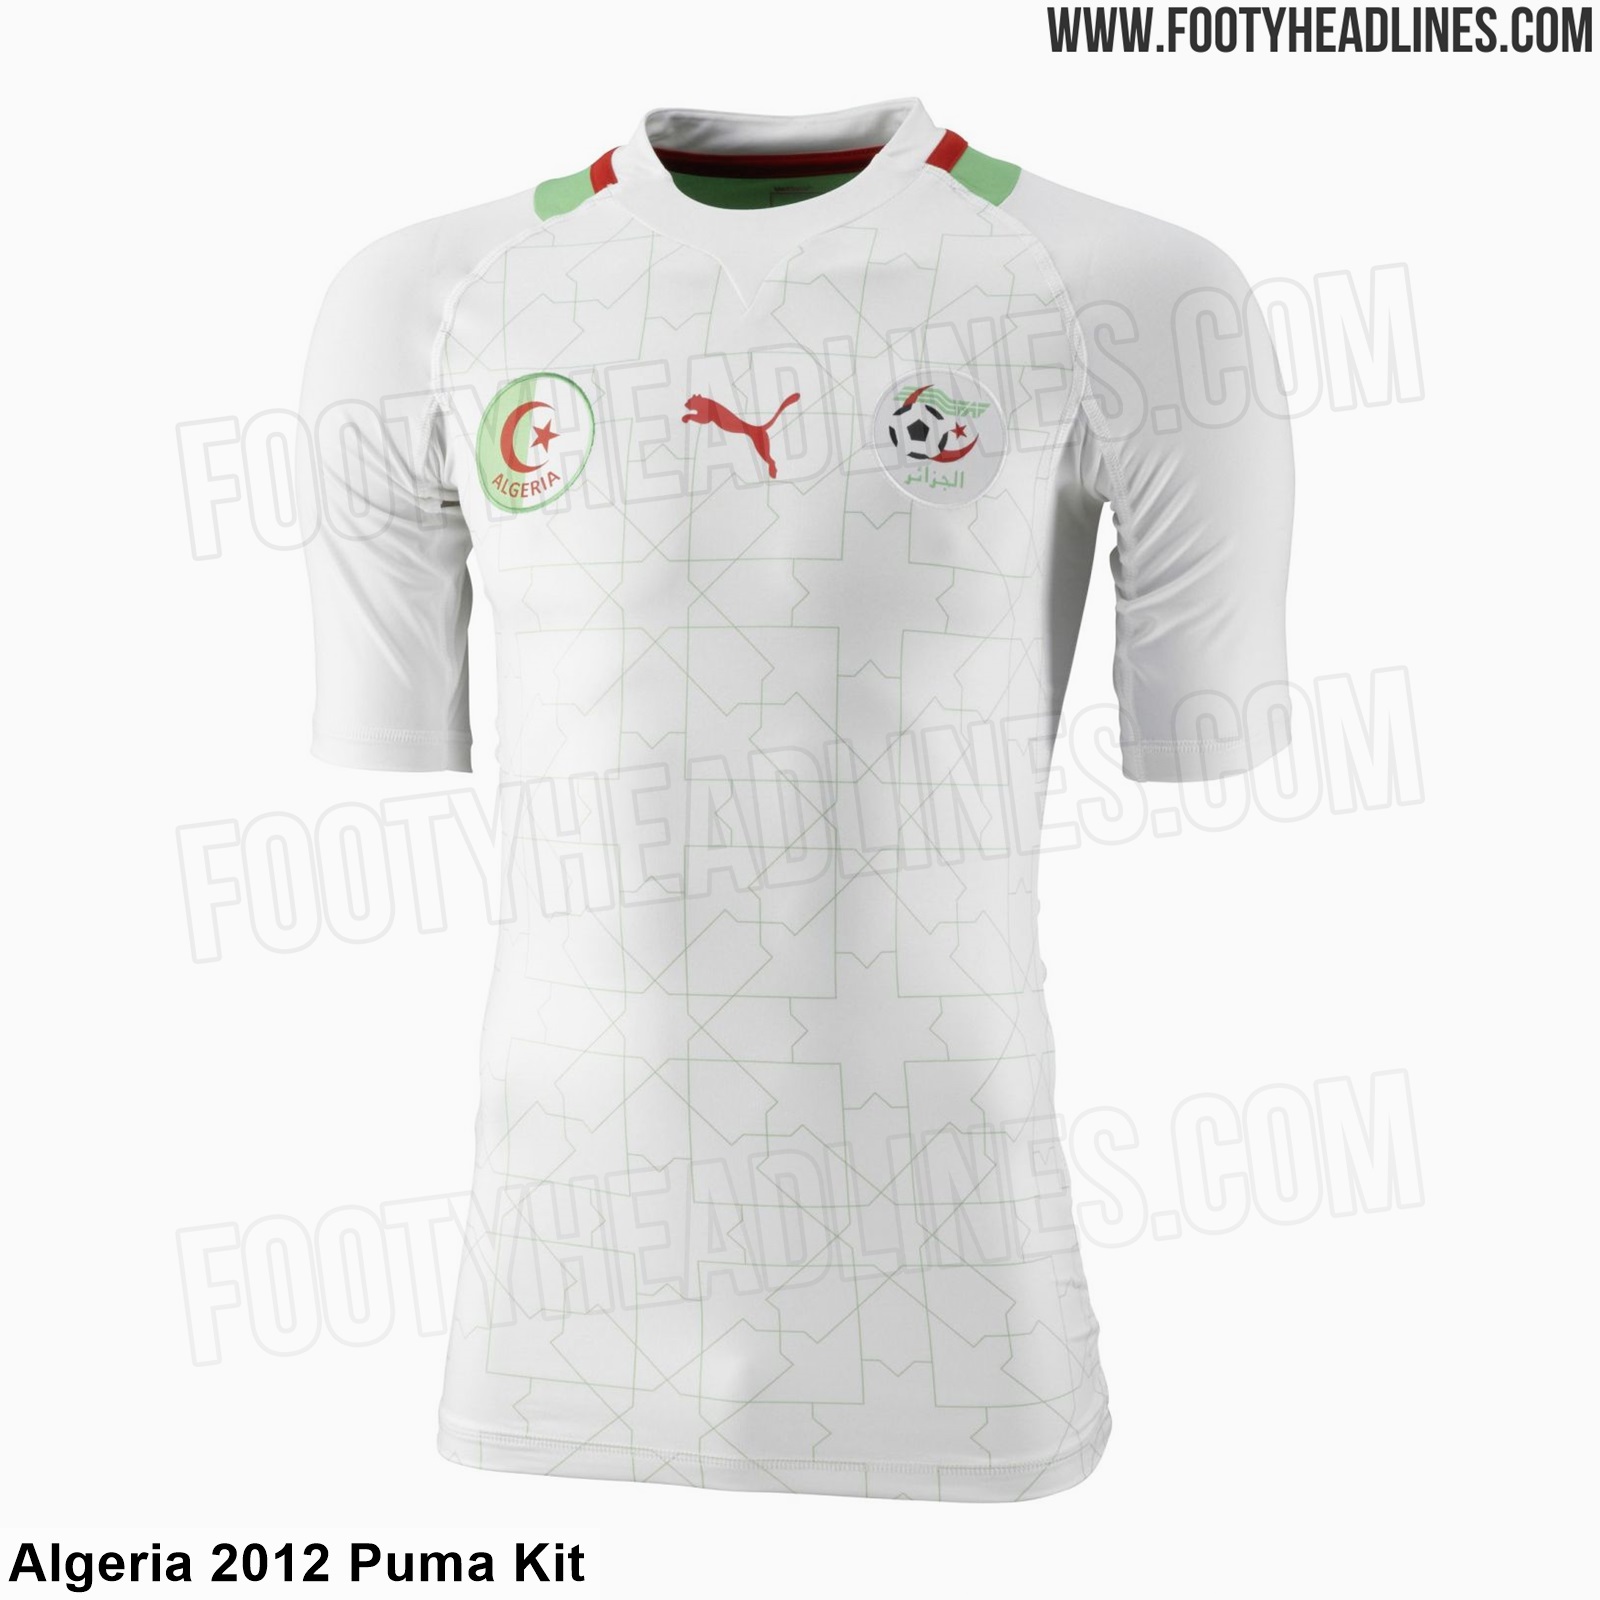 There is a problem with Algeria's adidas pre-match